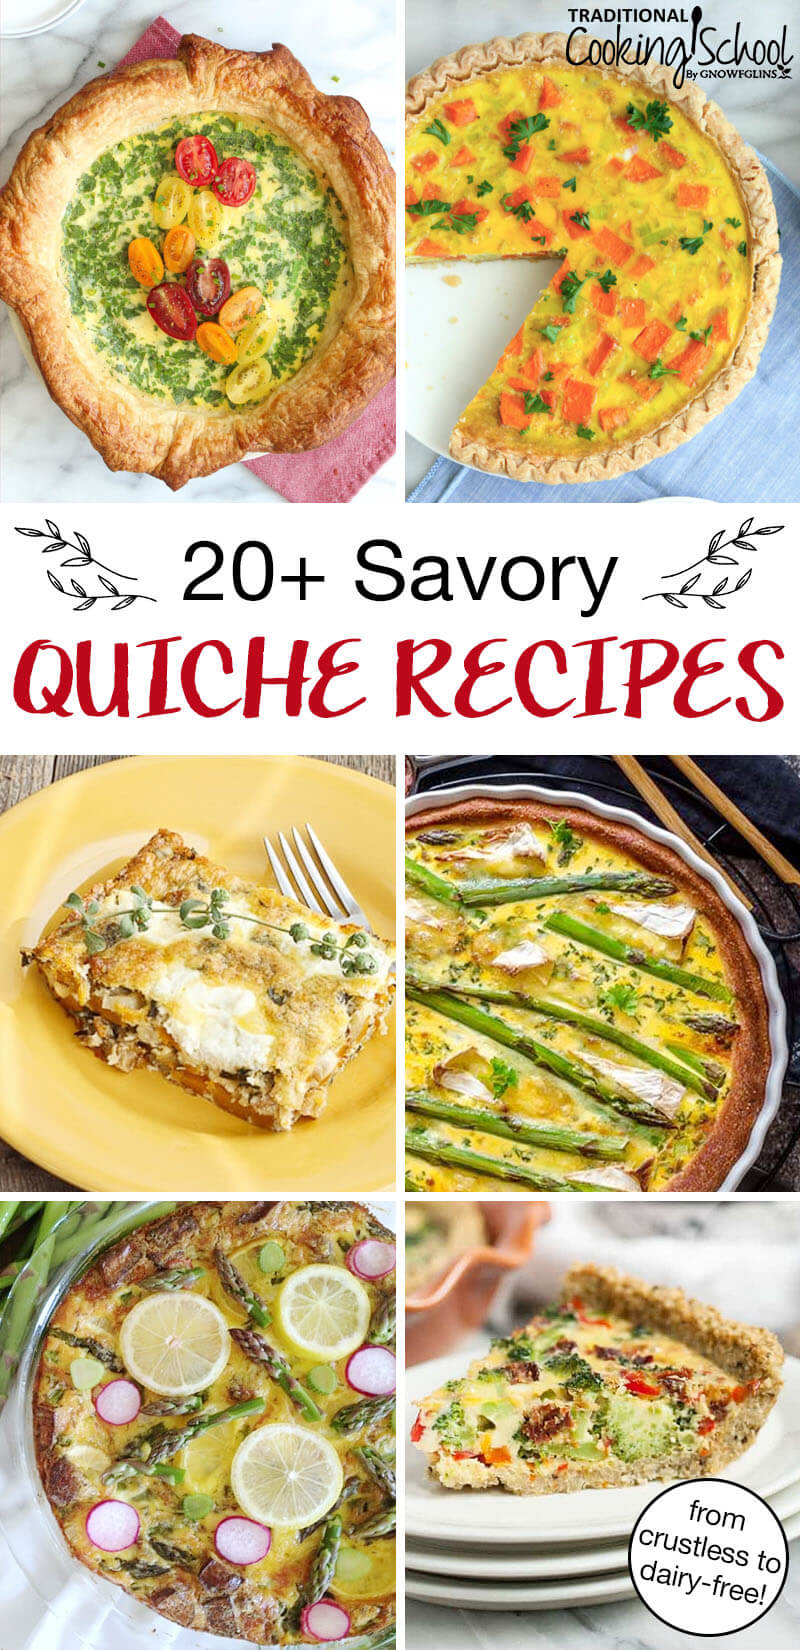 photo collage of quiches, with text overlay: "20+ Savory Quiche Recipes (from crustless to dairy-free!)"